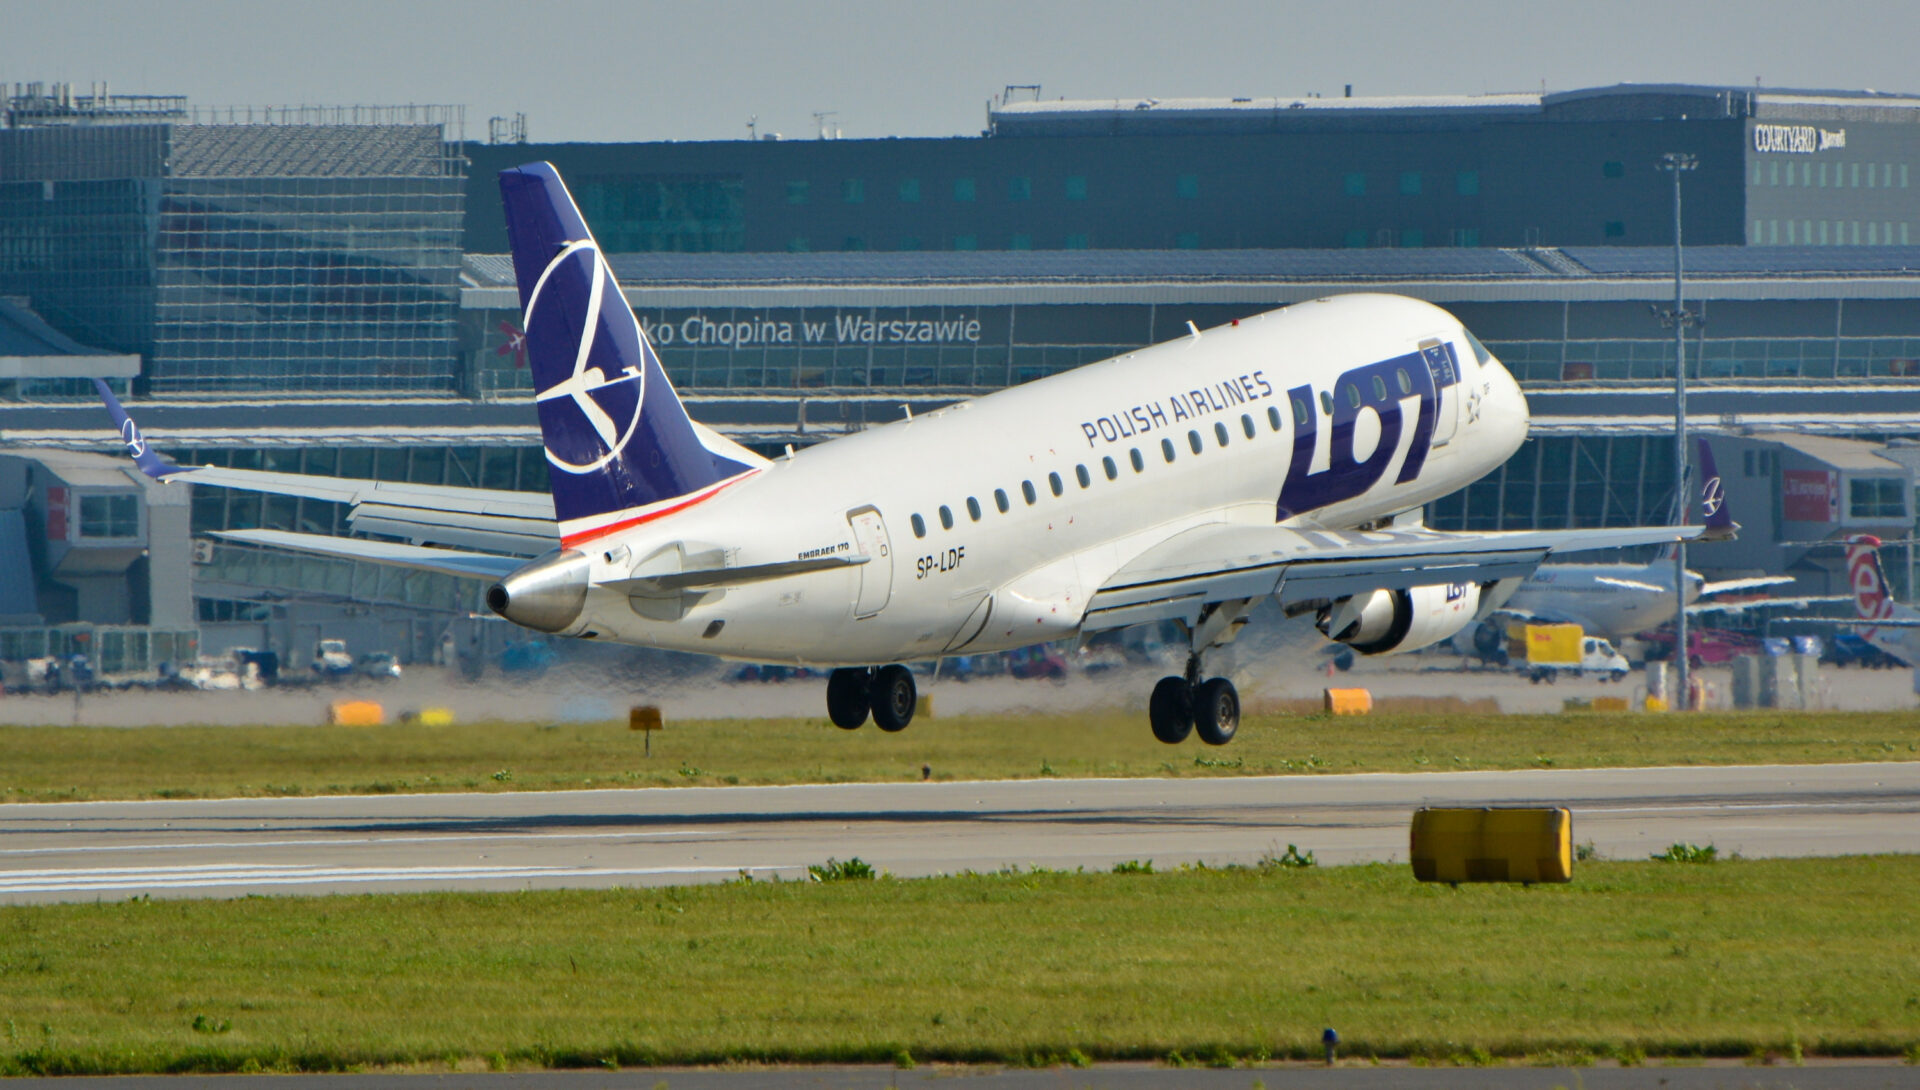 LOT Polish Airlines has launched an information campaign for Poles planning to visit the U.S.